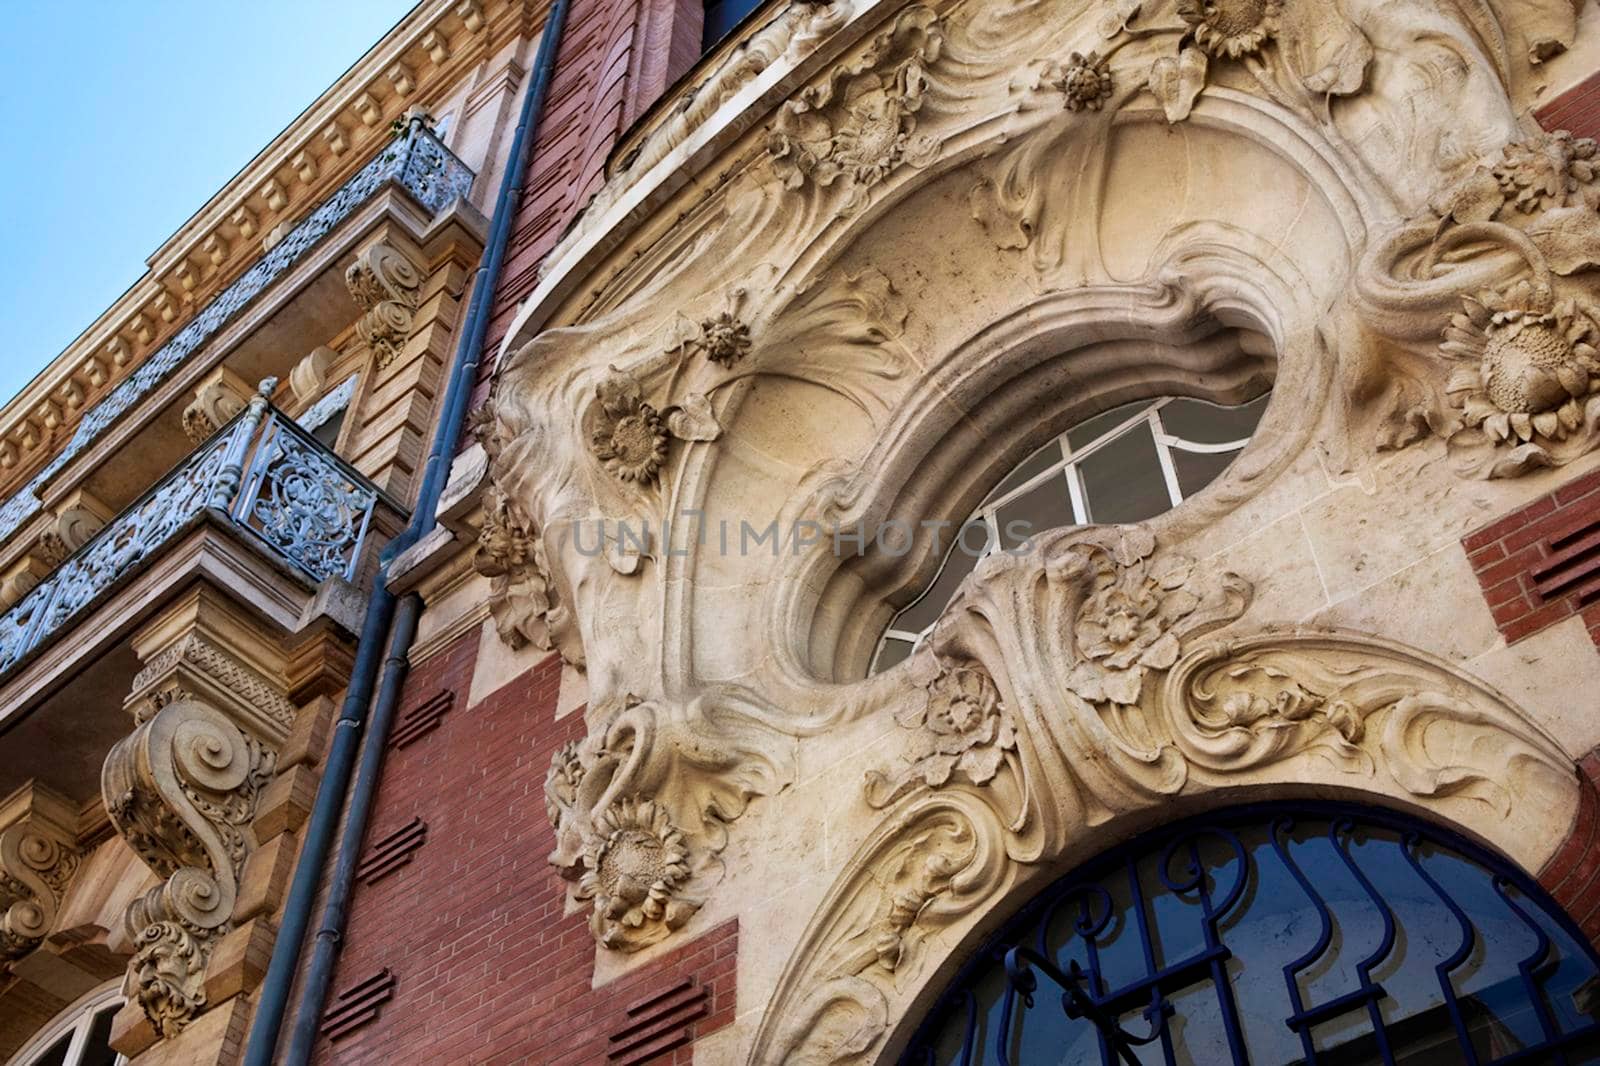 Facade of a baroque French house in Toulouse France by jacques_palut